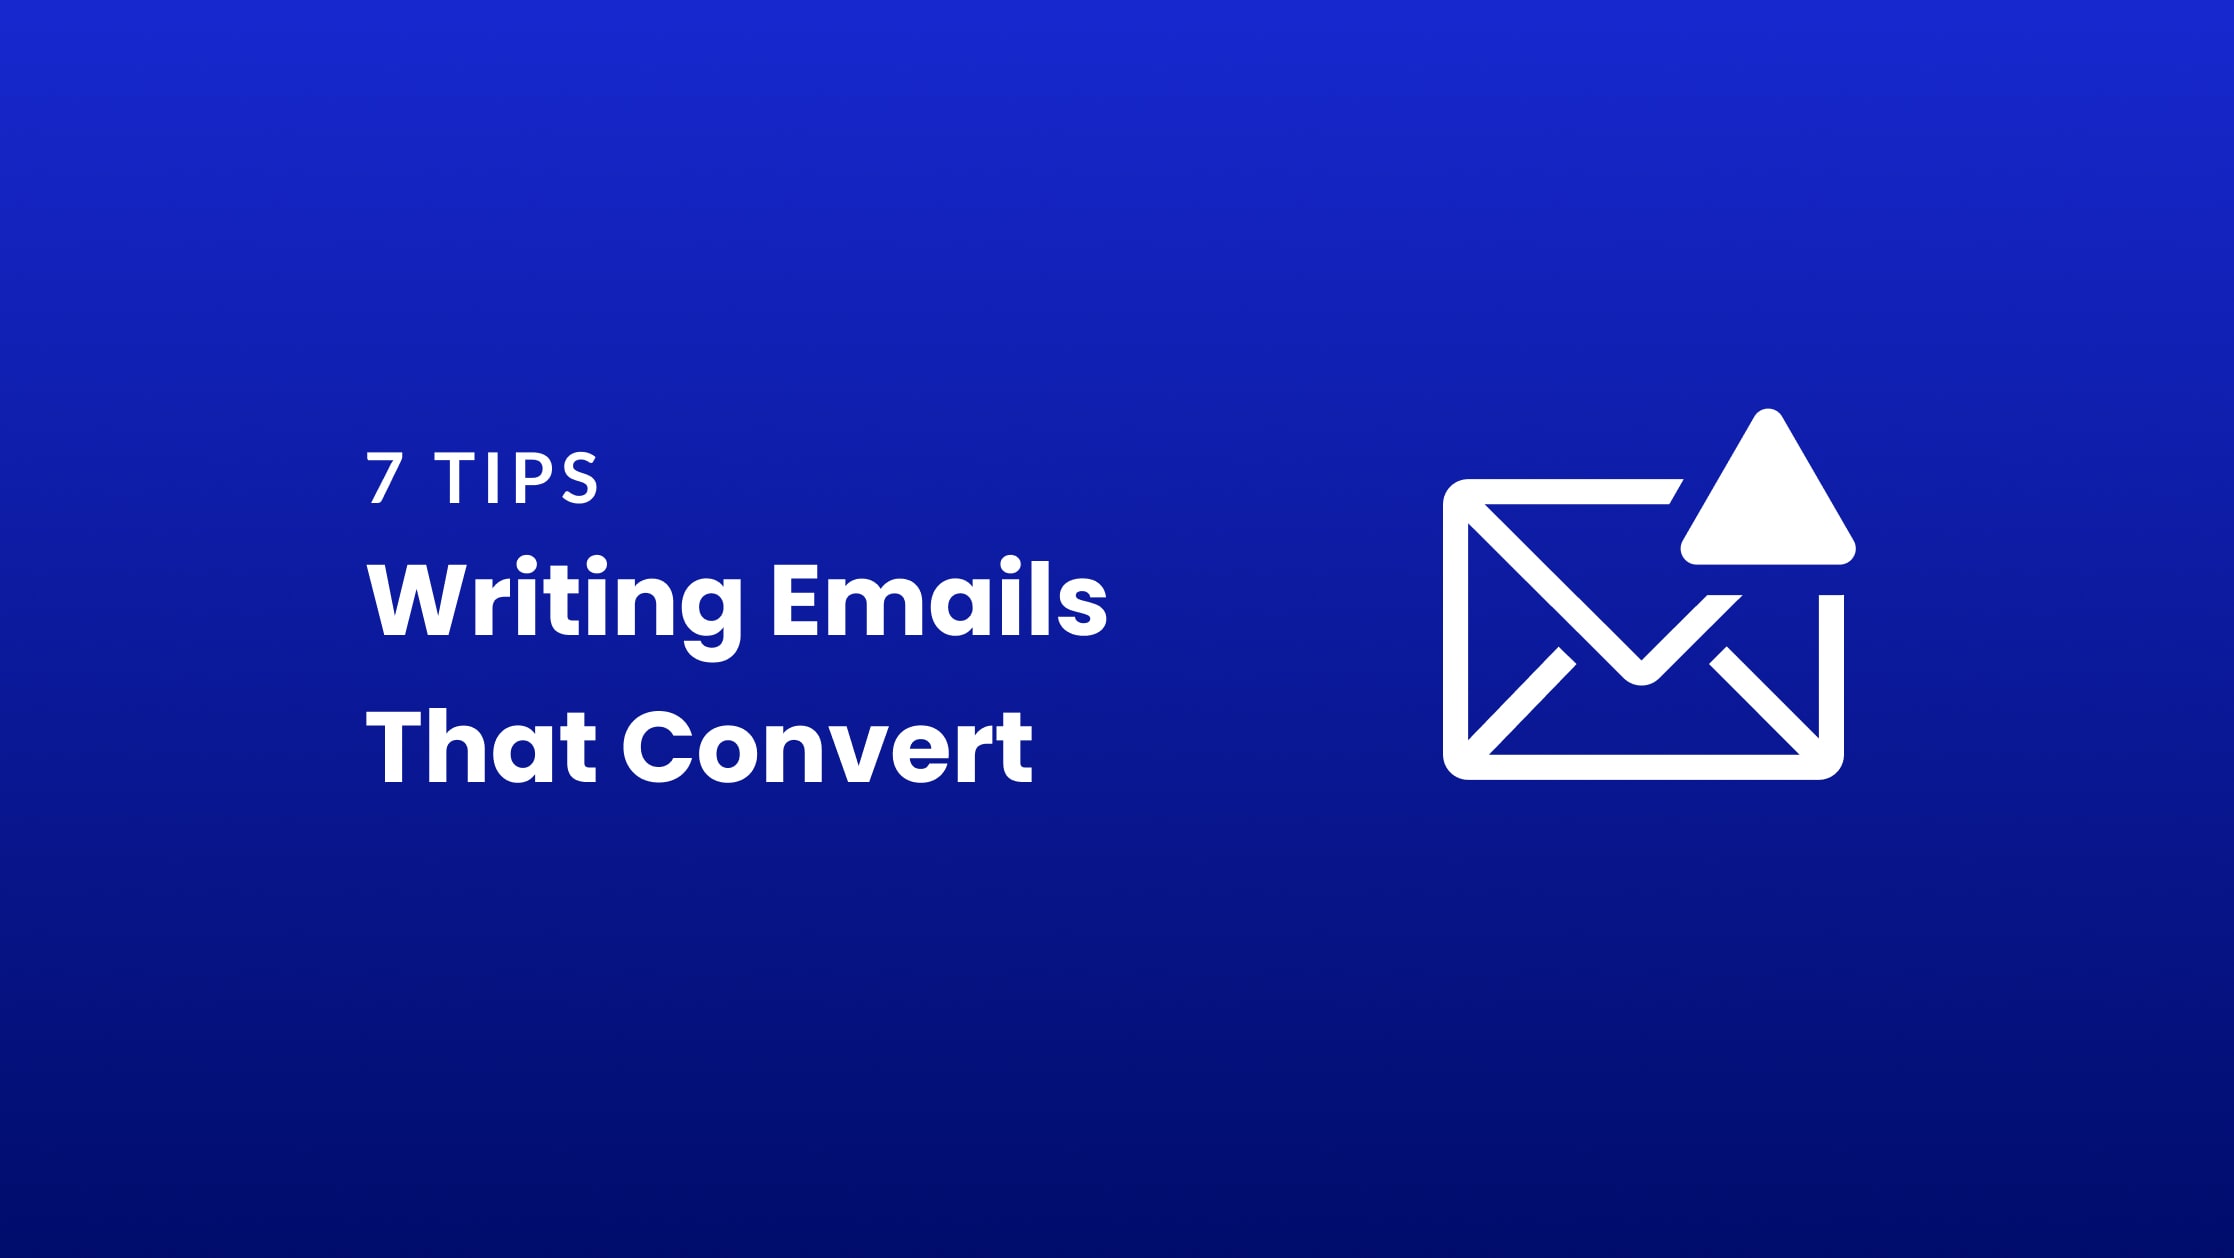 7 Tips For Writing Emails That Convert